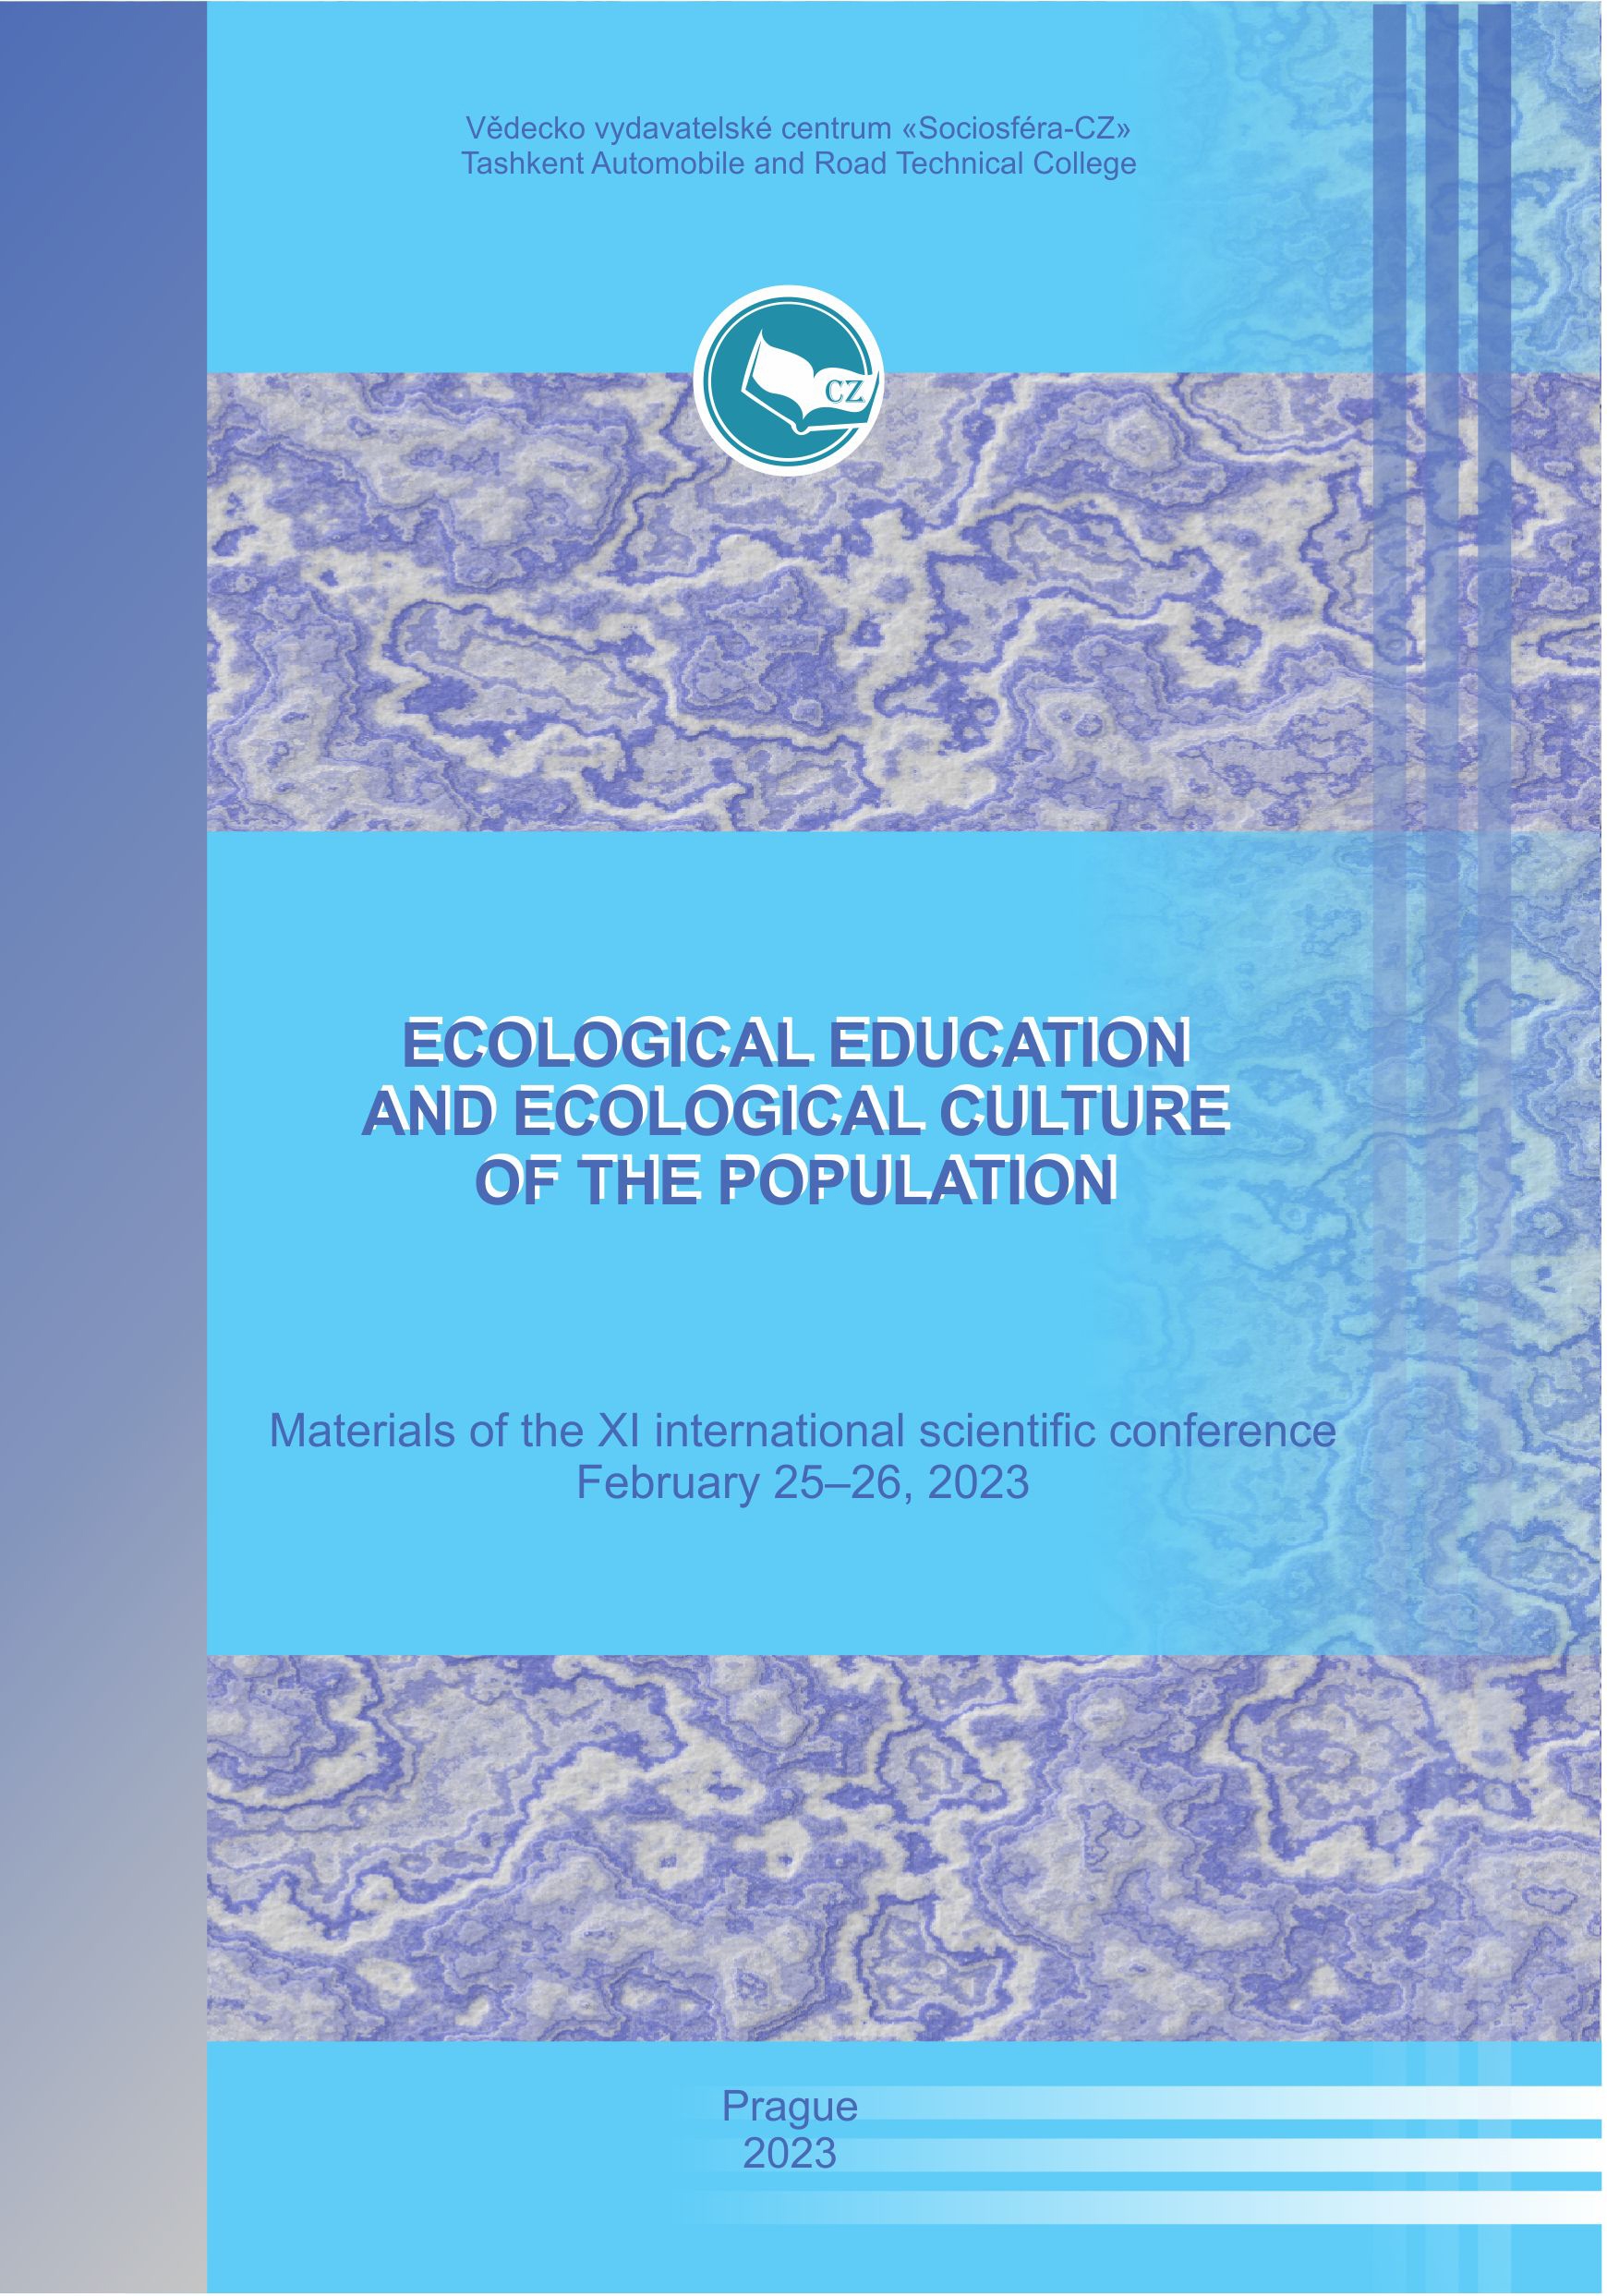 Ecological education and ecological culture of the population